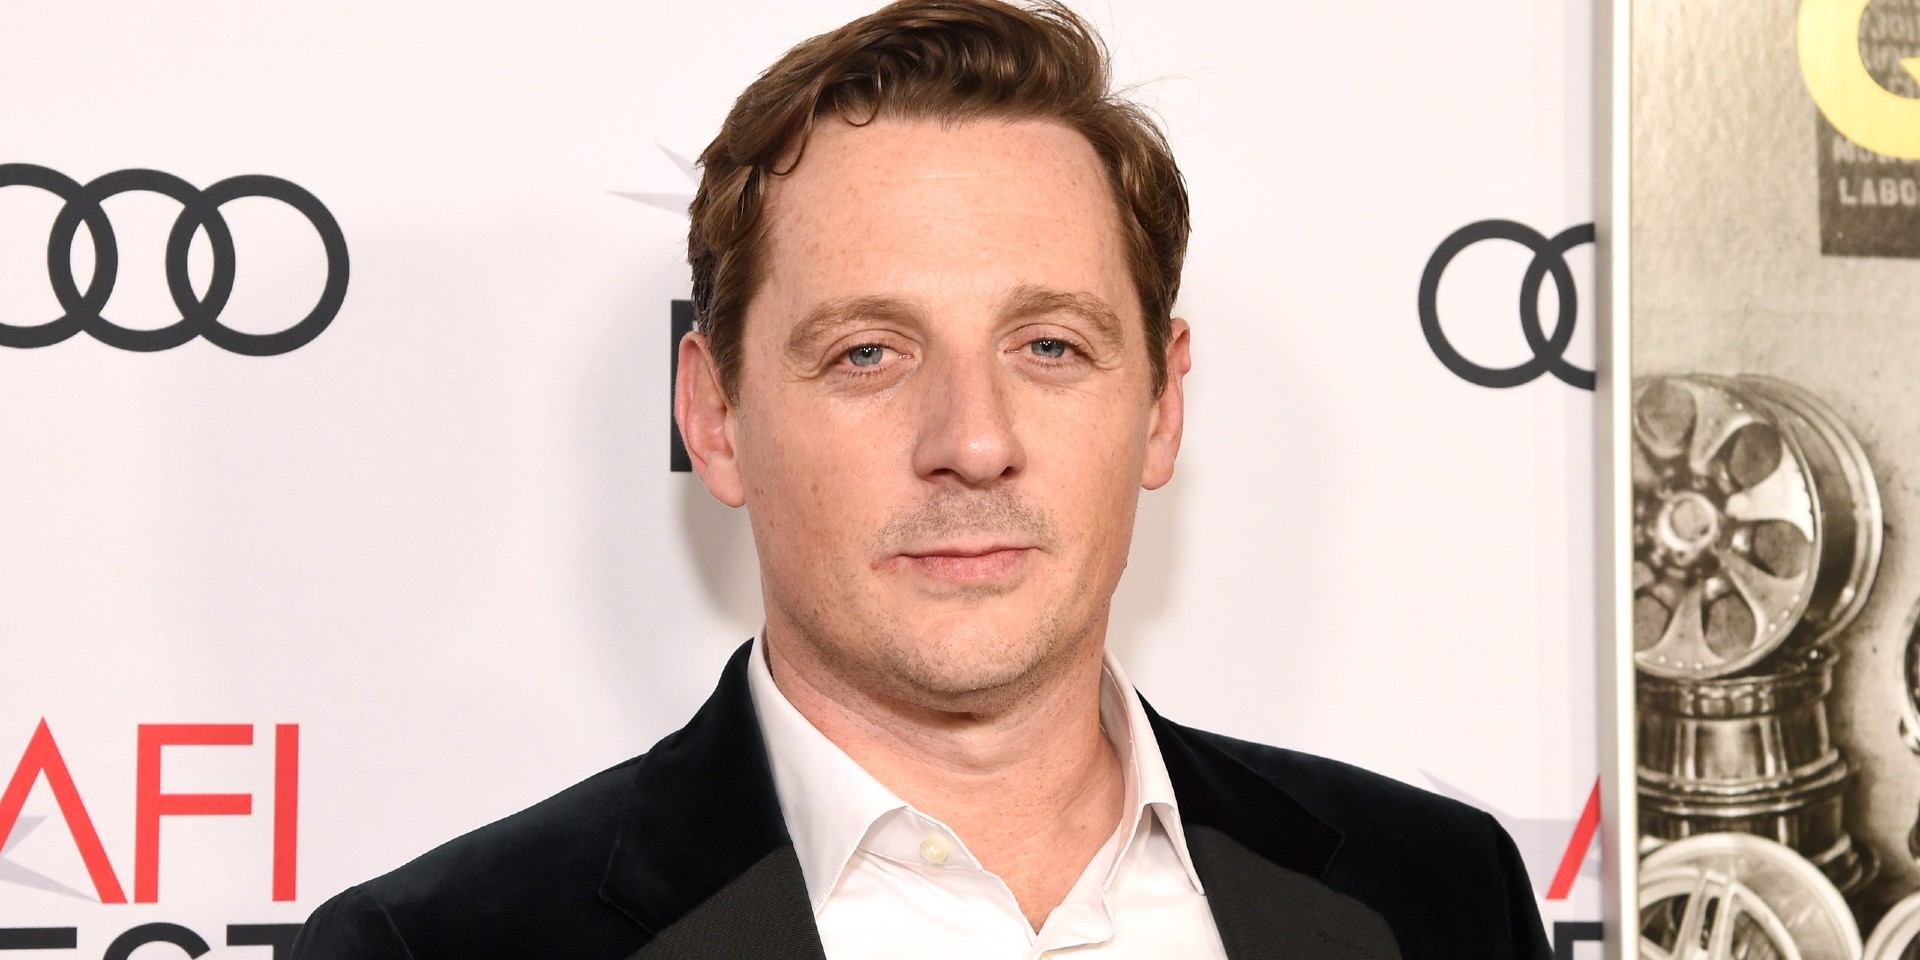 Image of an American country singer and a songwriter, Sturgill Simpson